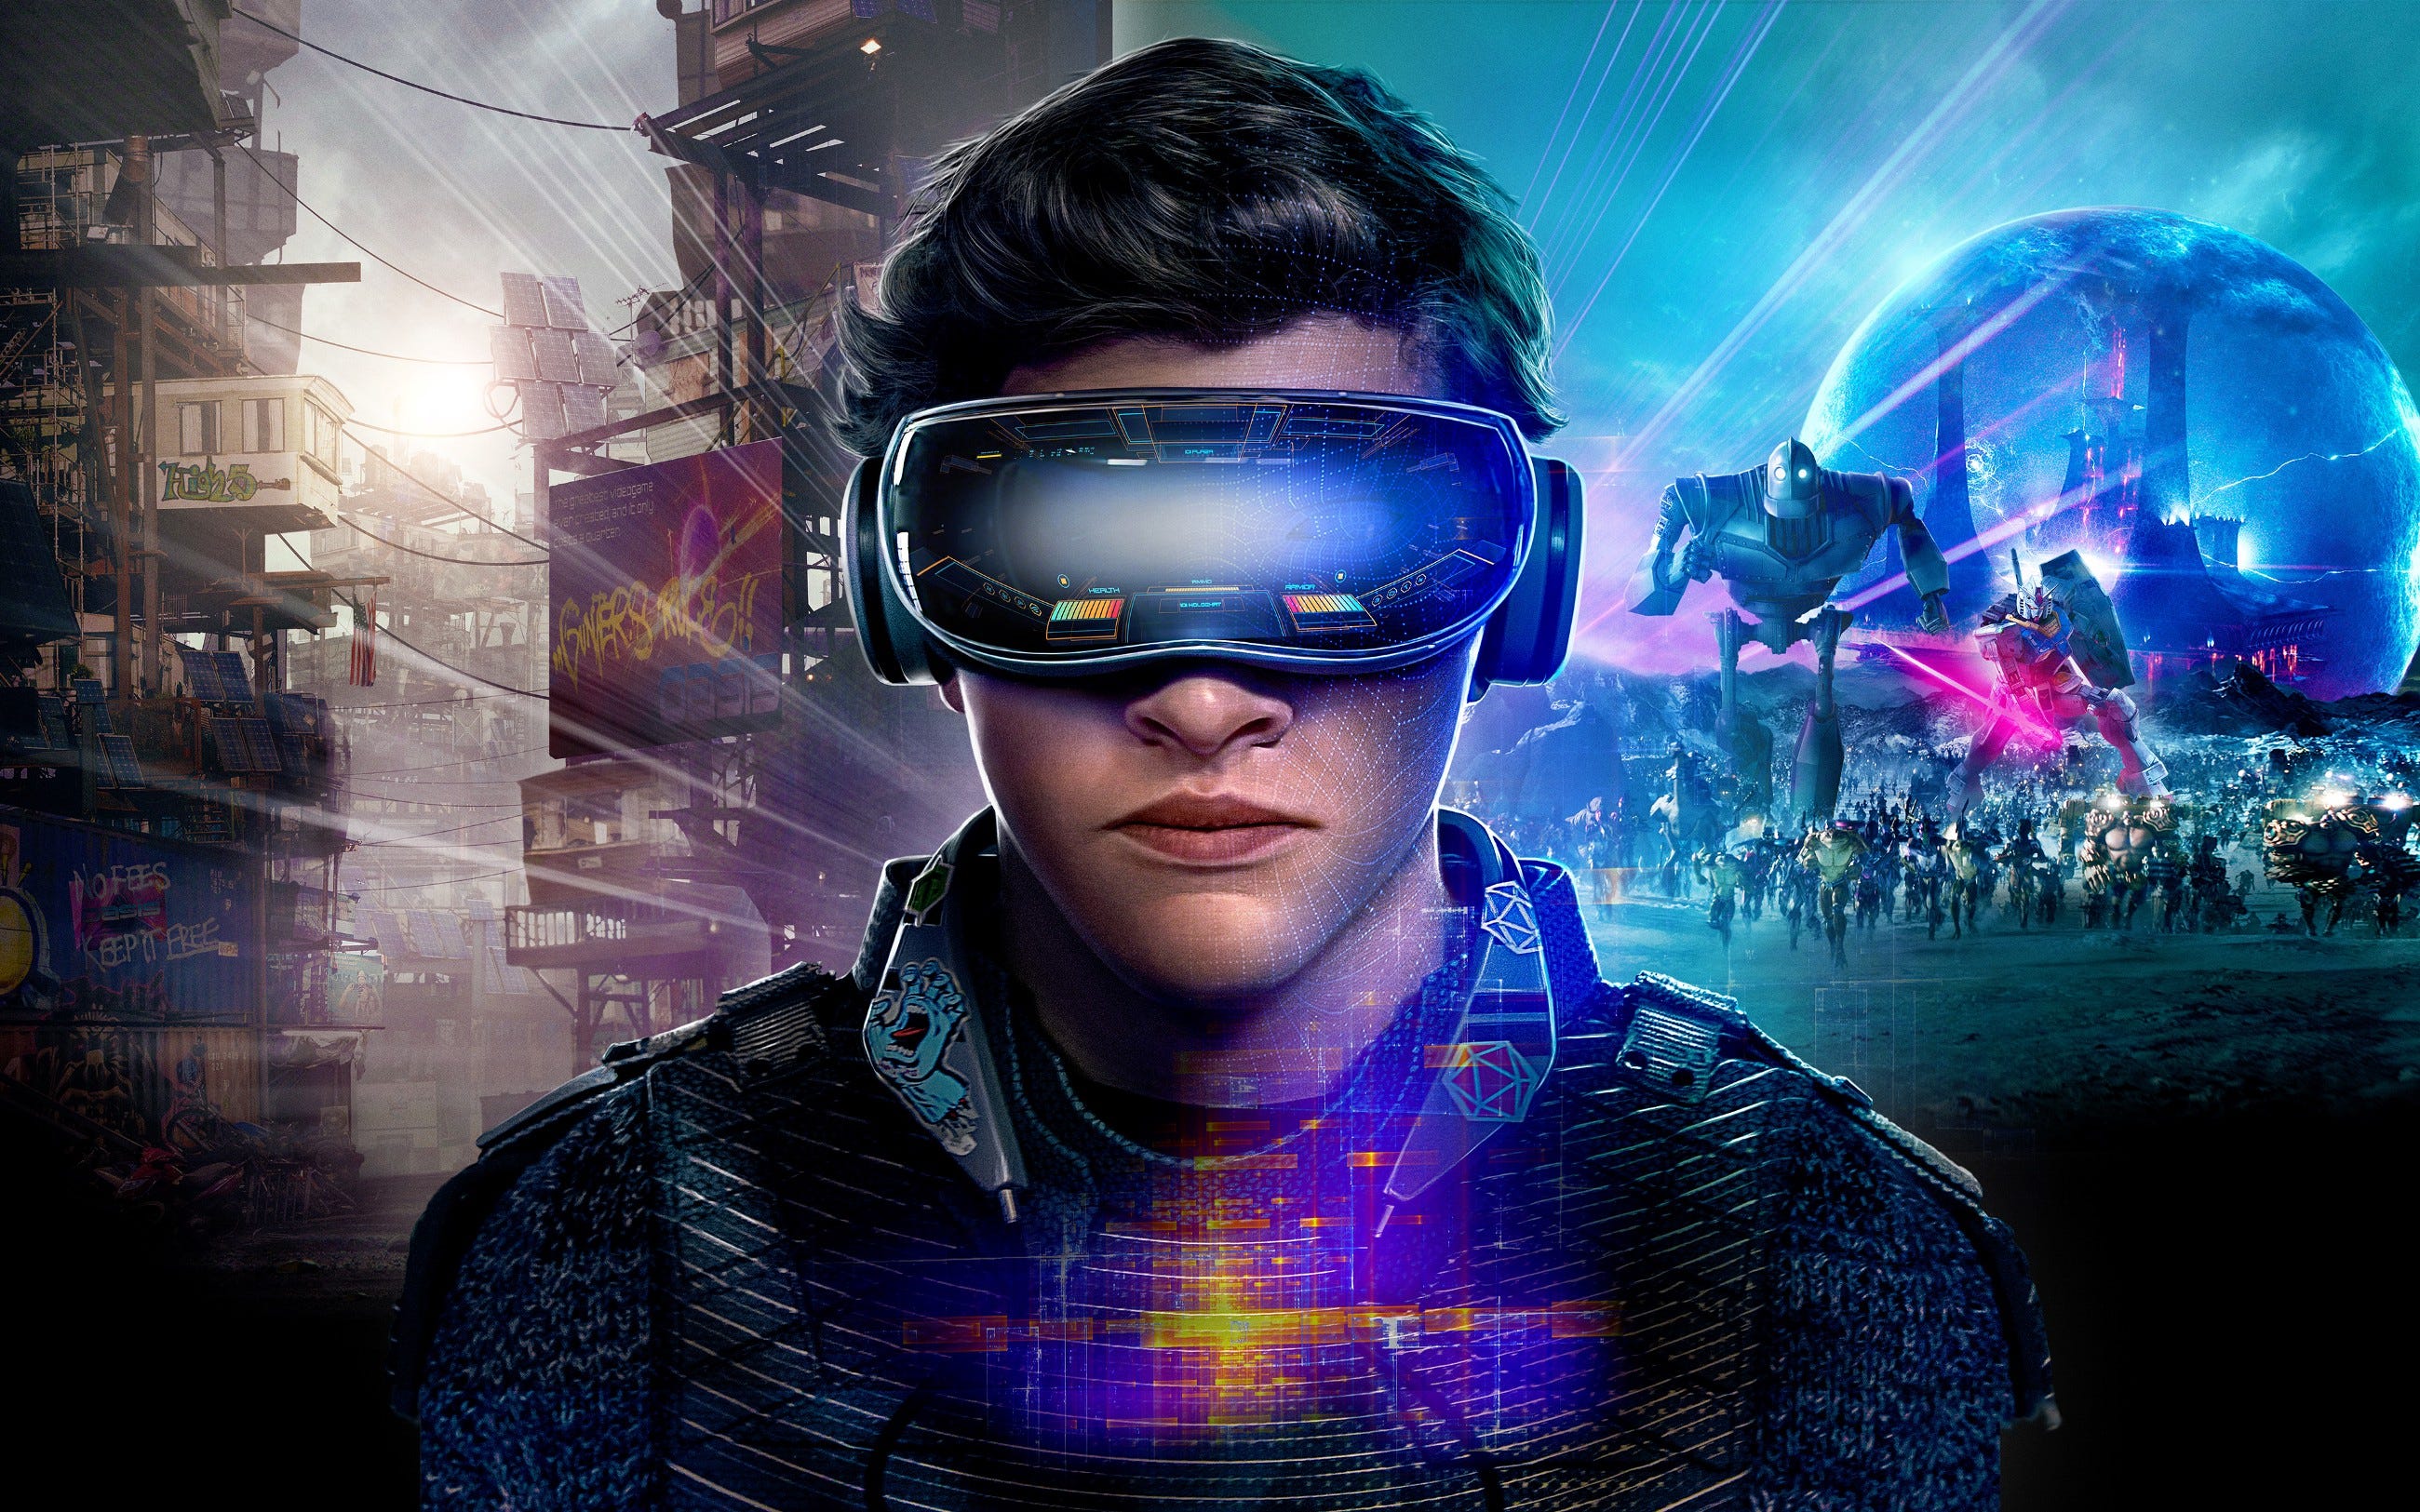 Ready Player One Parzival magnet  Ready player one, Player one, Parzival ready  player one